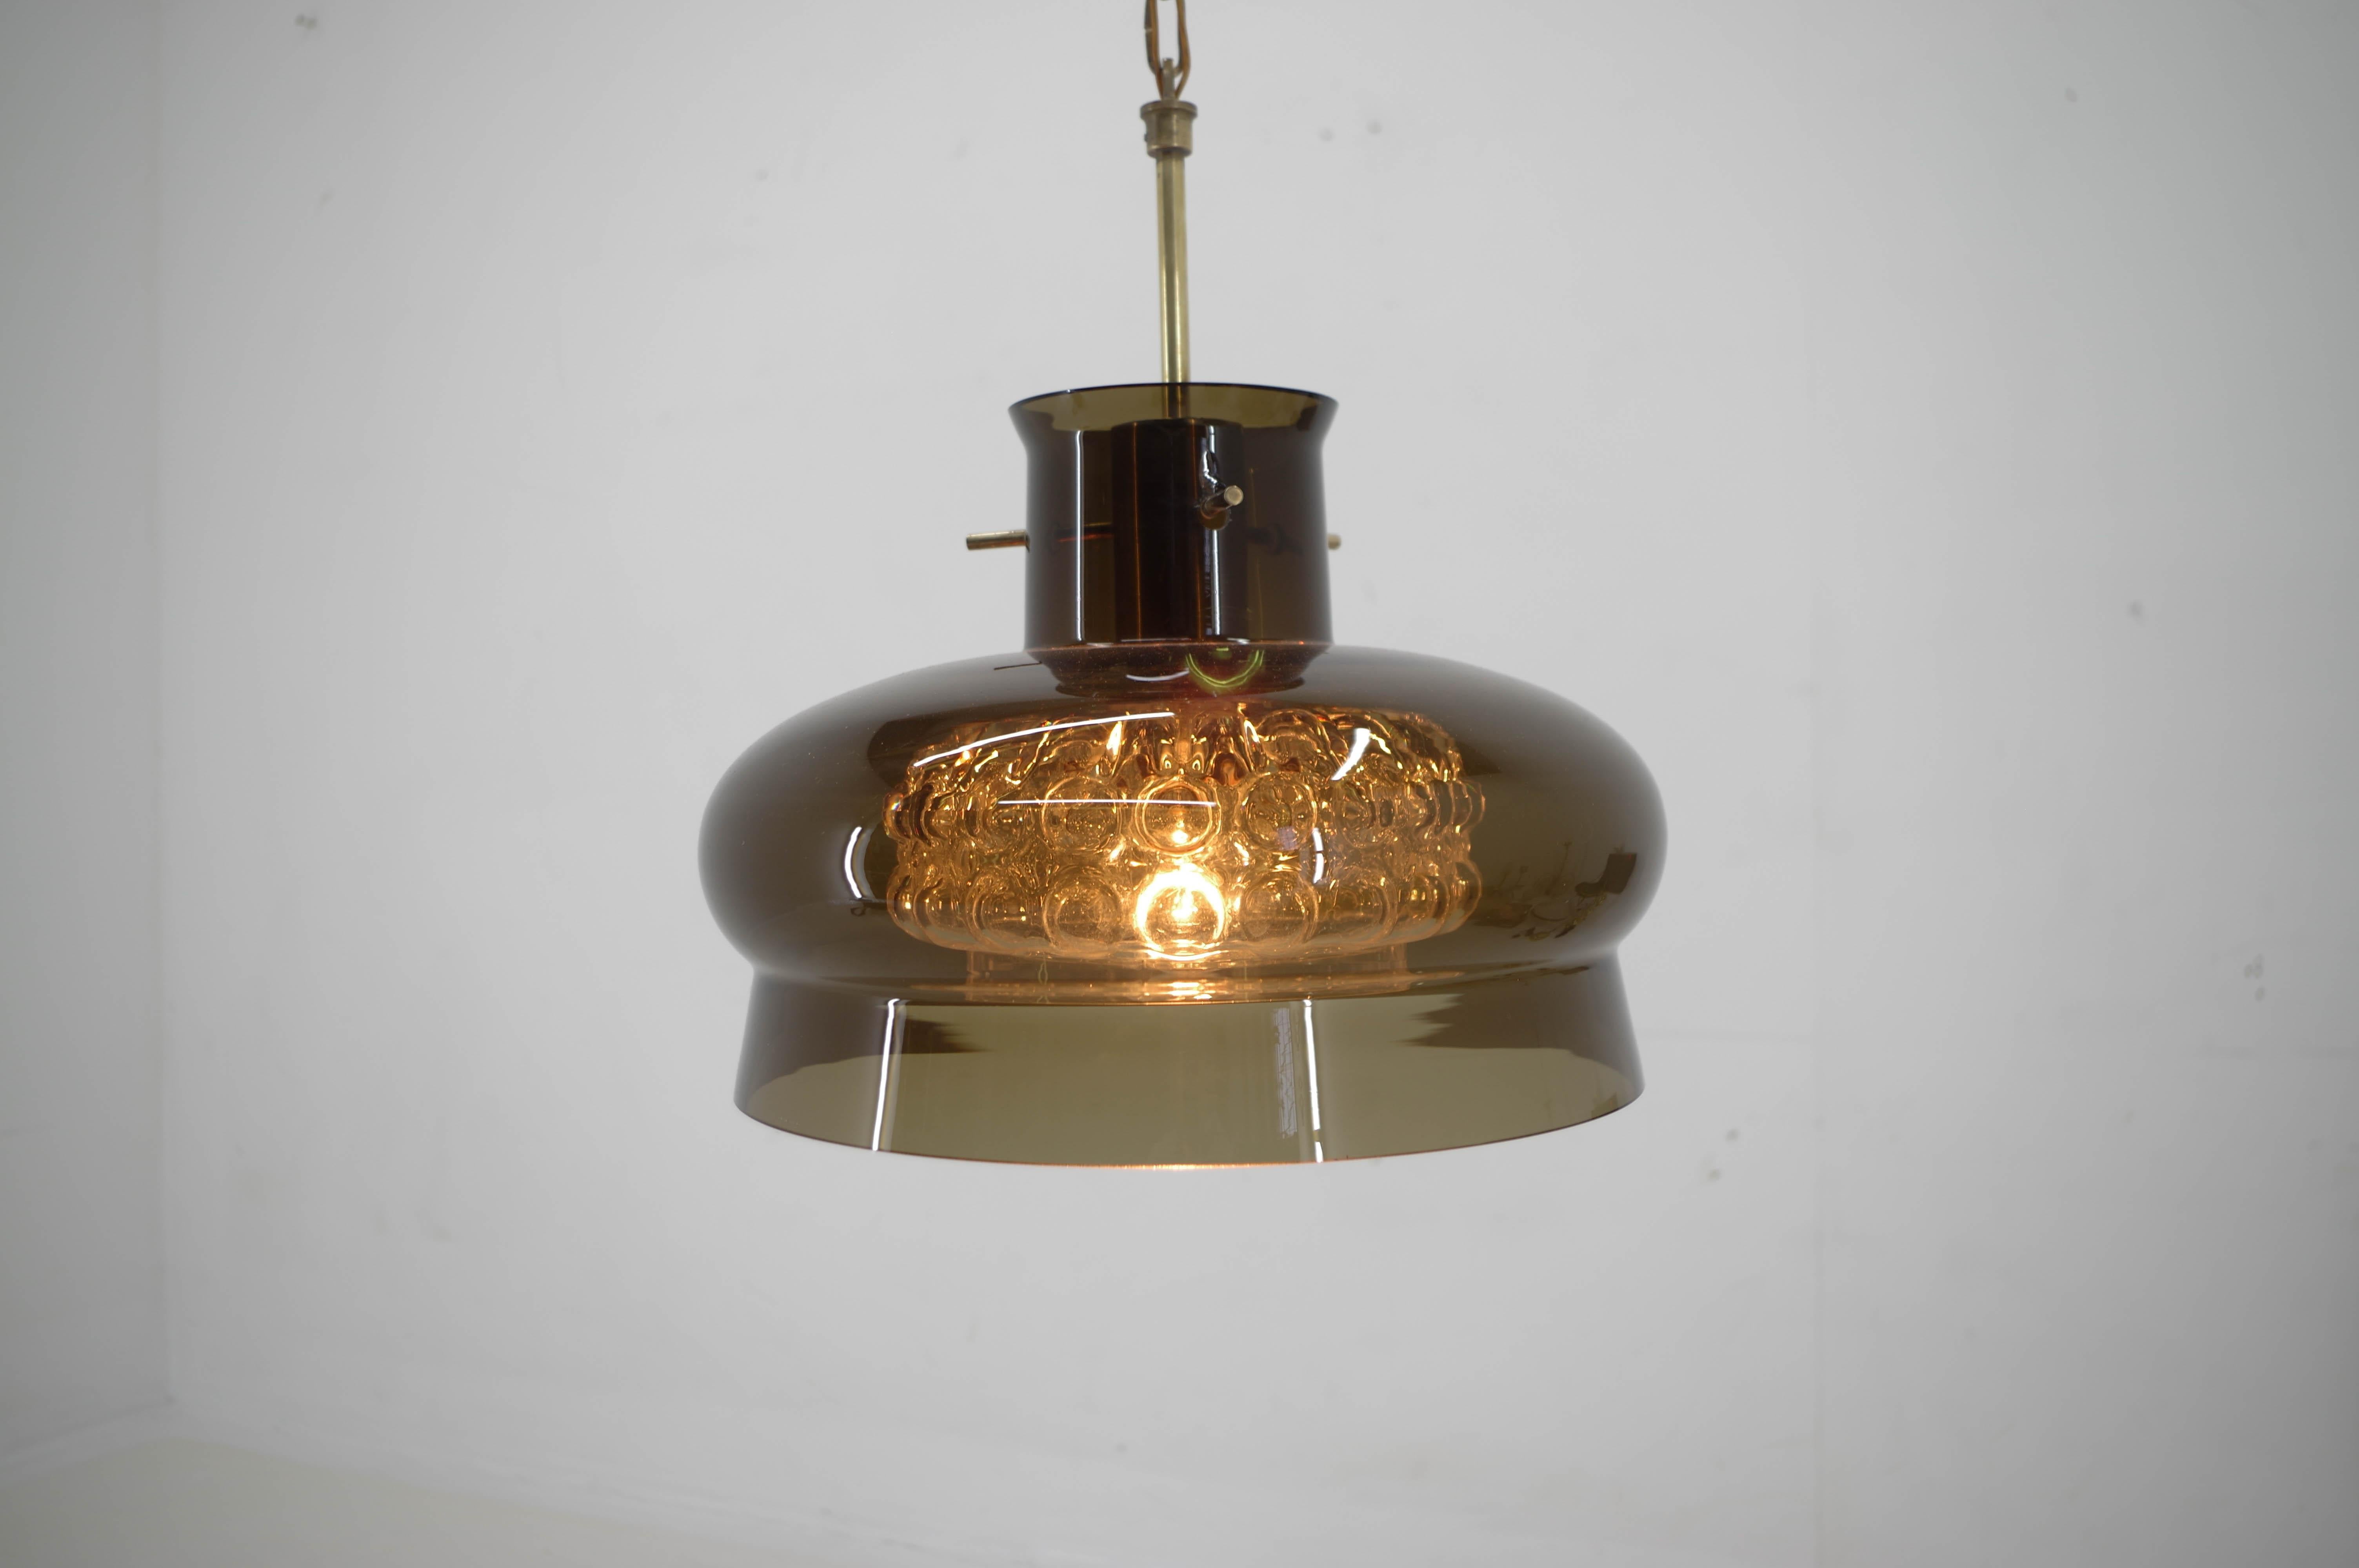 Glass pendant by Carl Fagerlund fro Orrefors, Sweden.
Double glass shades on brass chain.
Two dents on brown glass shade visible on pictures and one small plastic ring missing.
1x60W, E25-E27 bulb
US wiring compatible